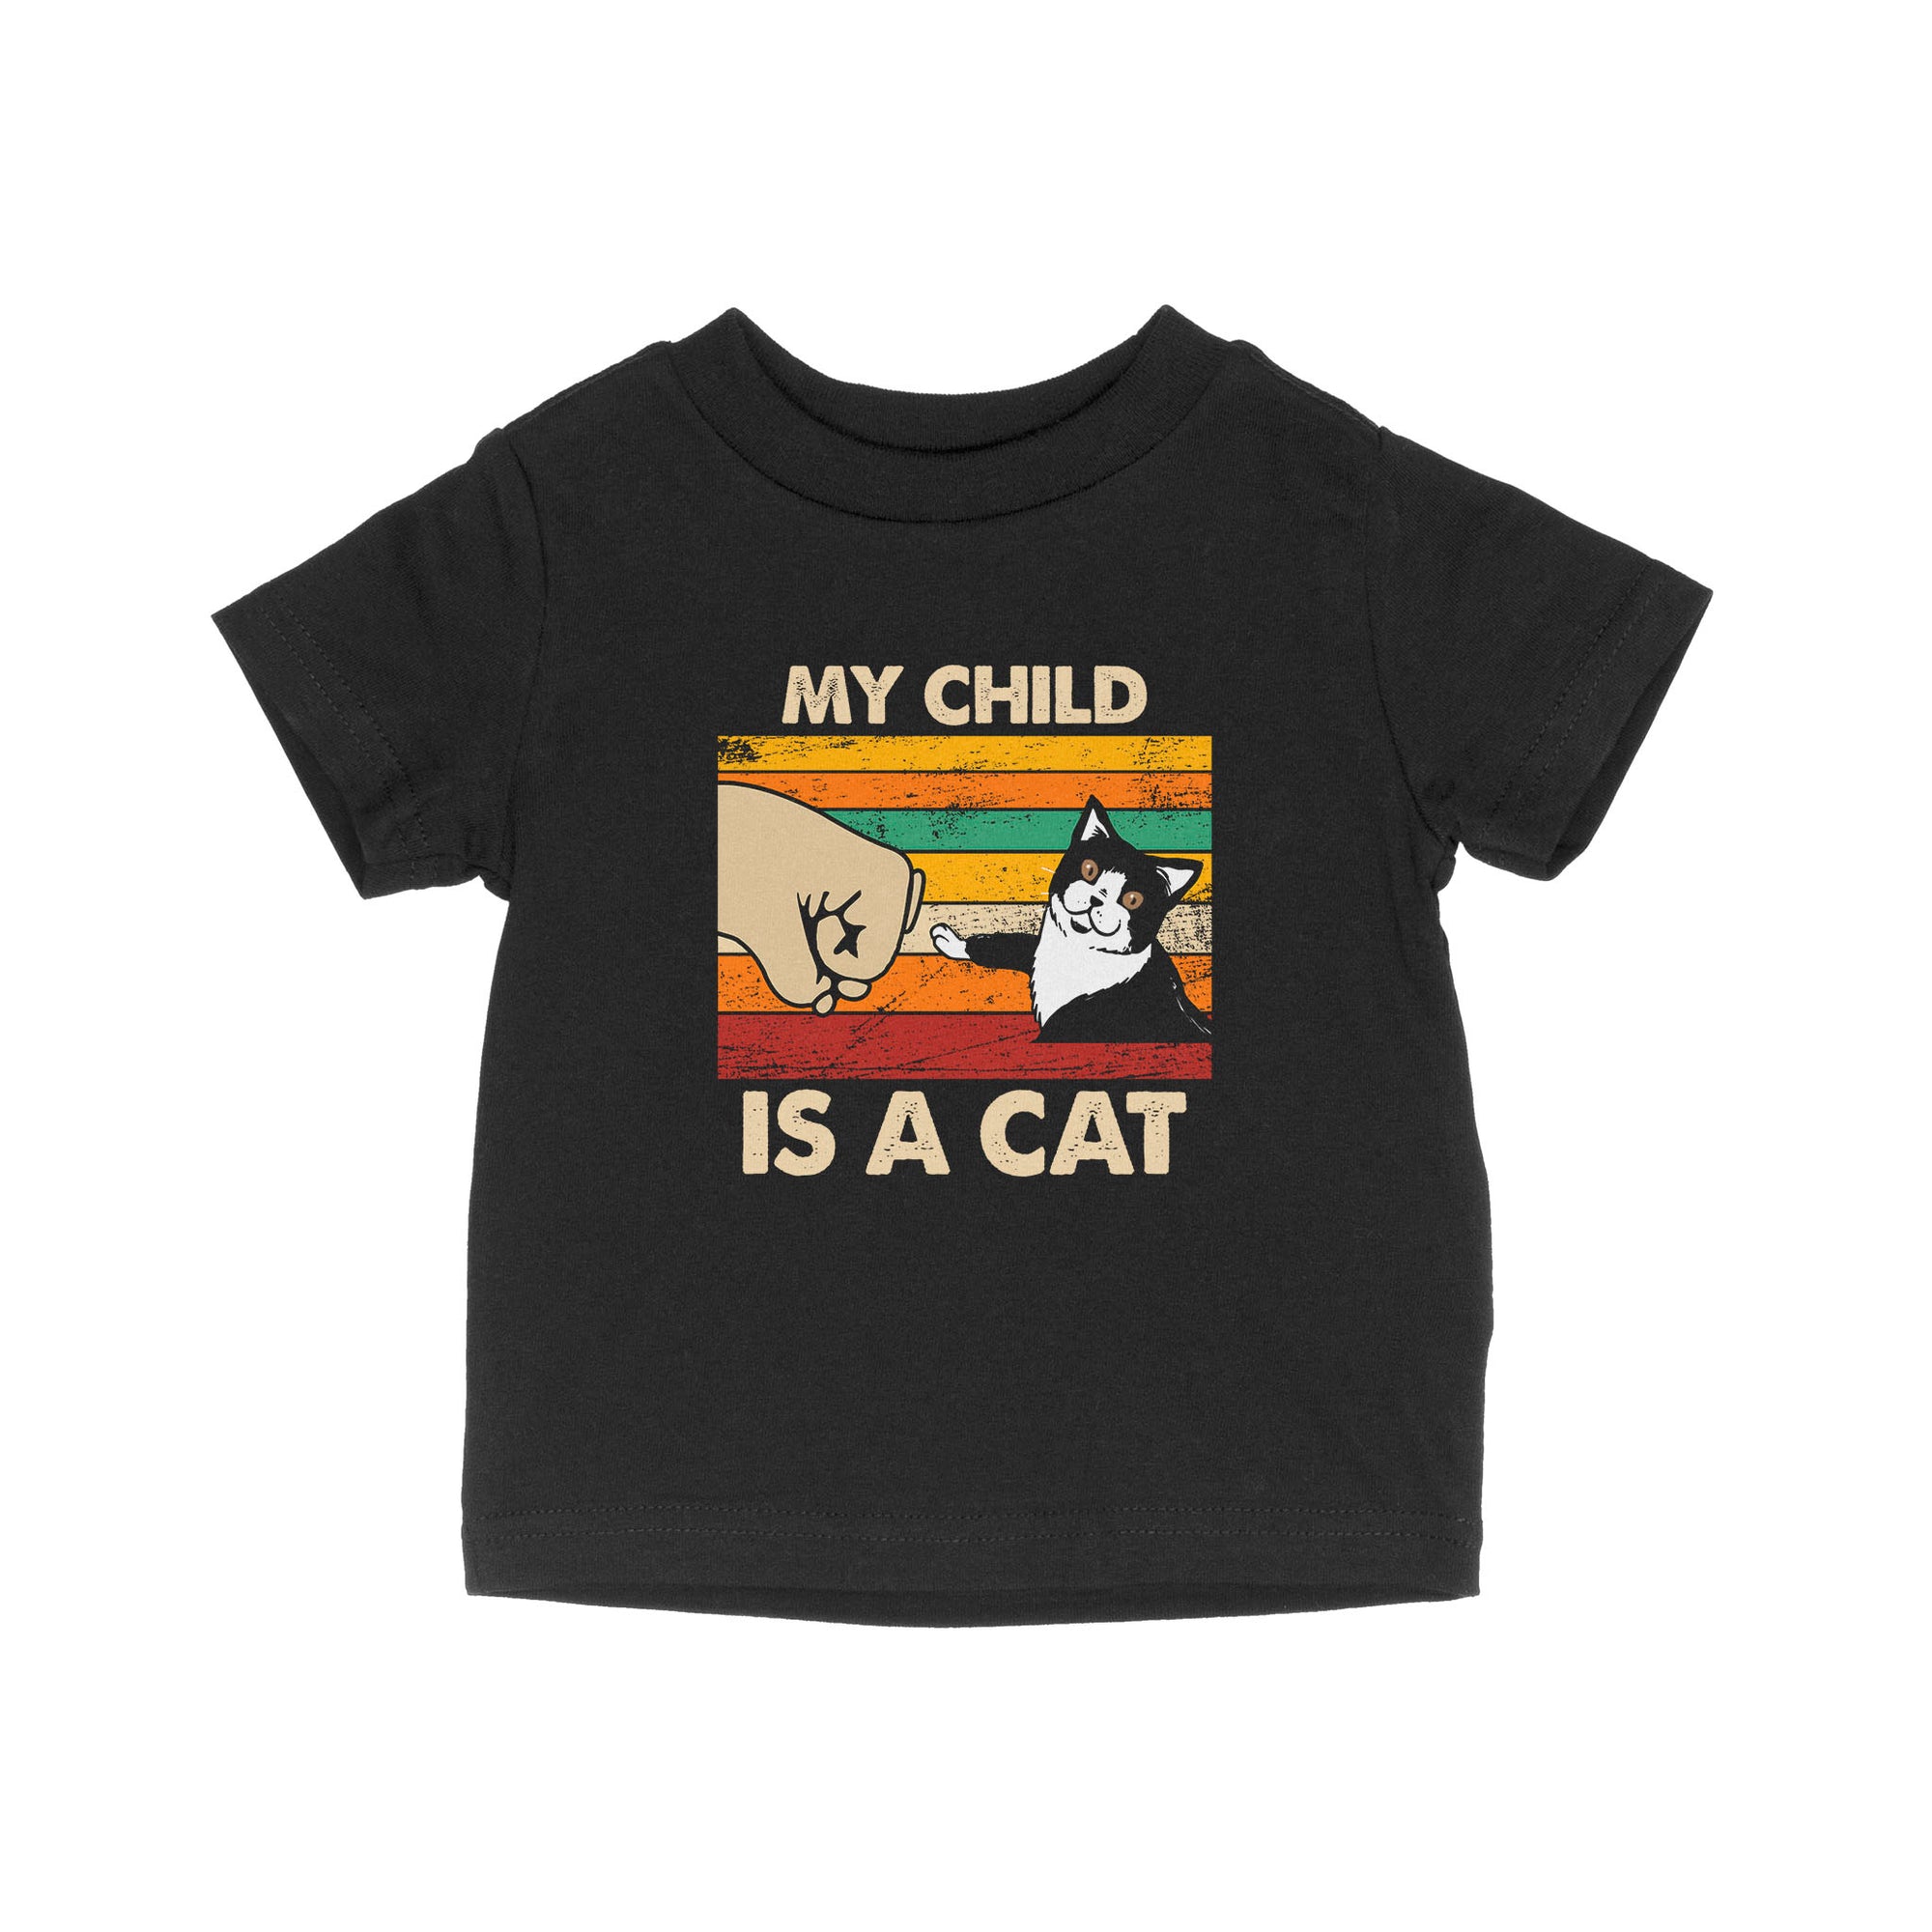 My Child Is A Cat - Baby T-Shirt